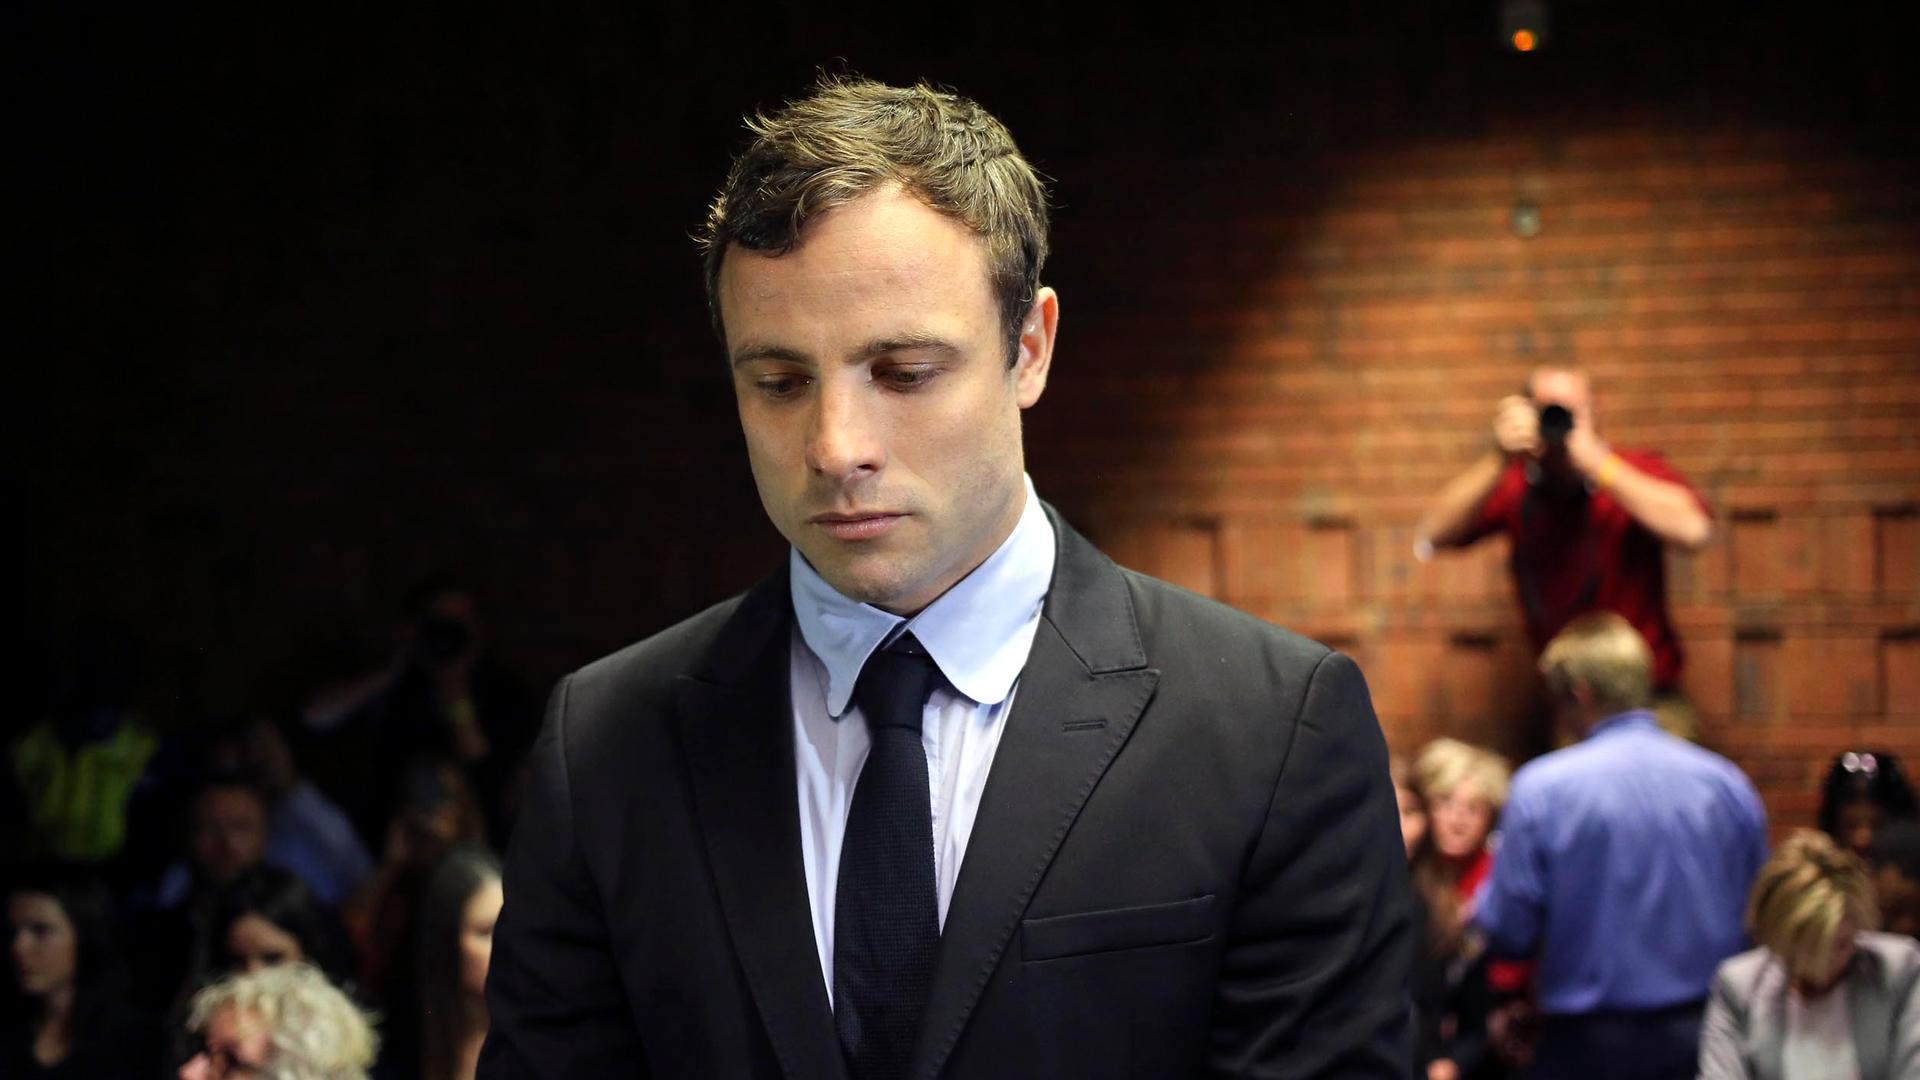 Olympic and Paralympic running star Oscar Pistorius stands during court proceedings at the Pretoria Magistrates court.